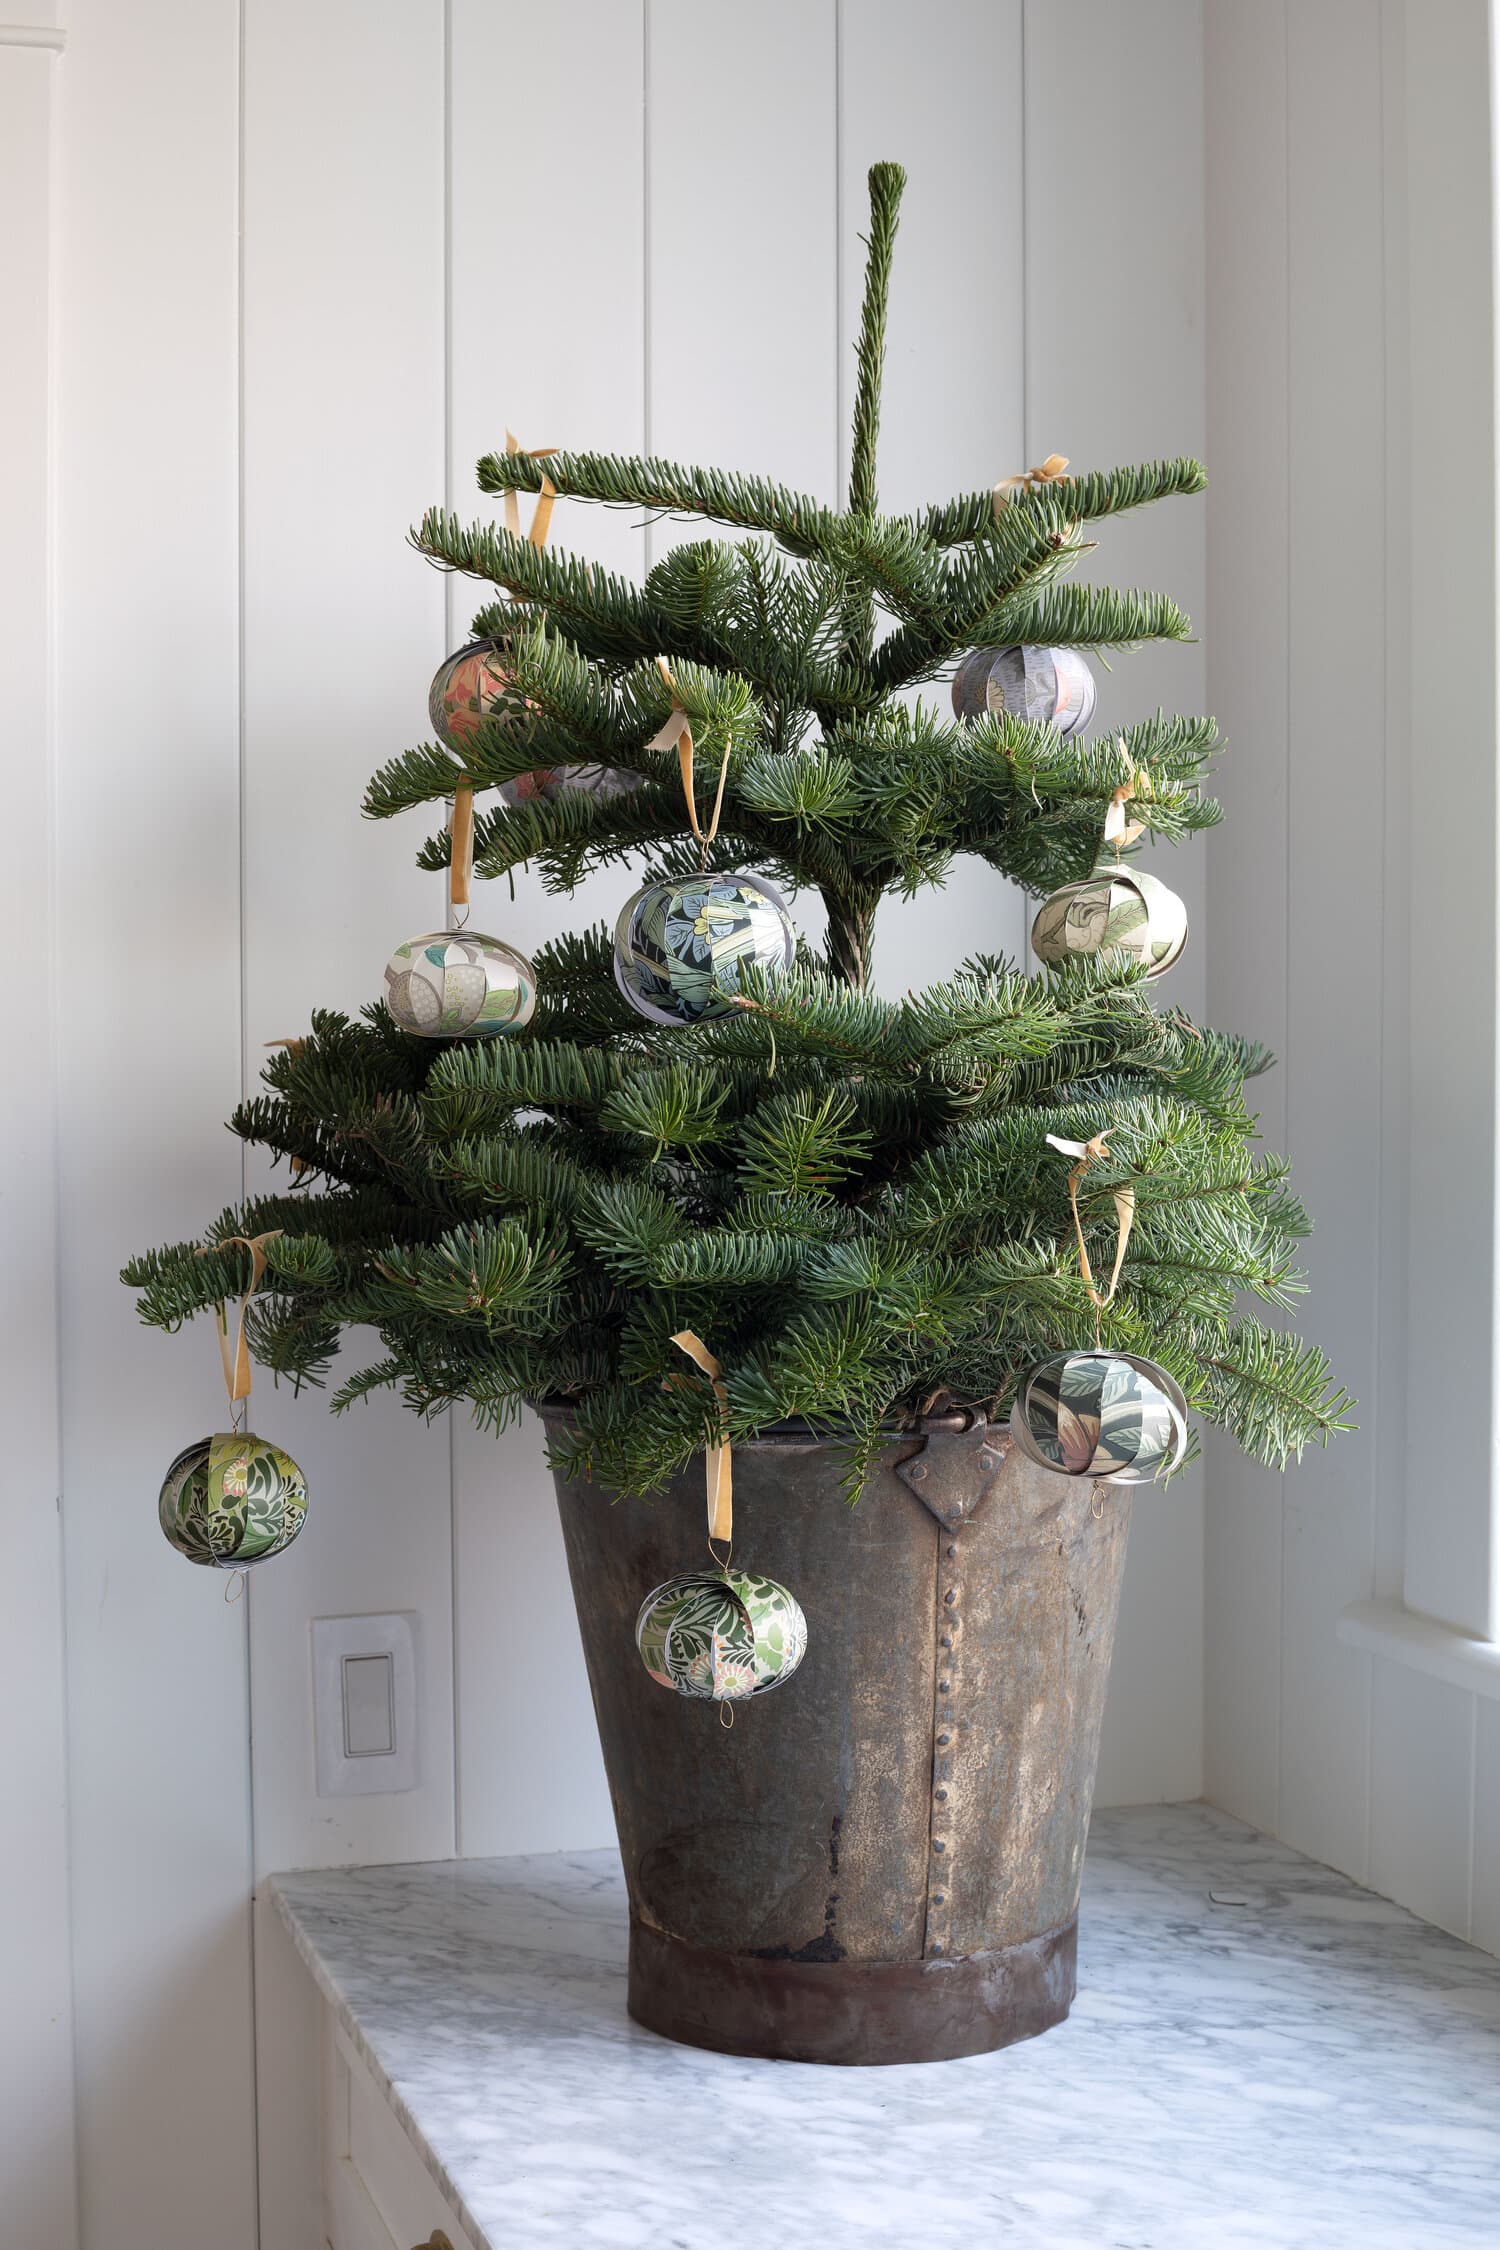 Christmas tree idea featuring a small tree inside a wooden basket